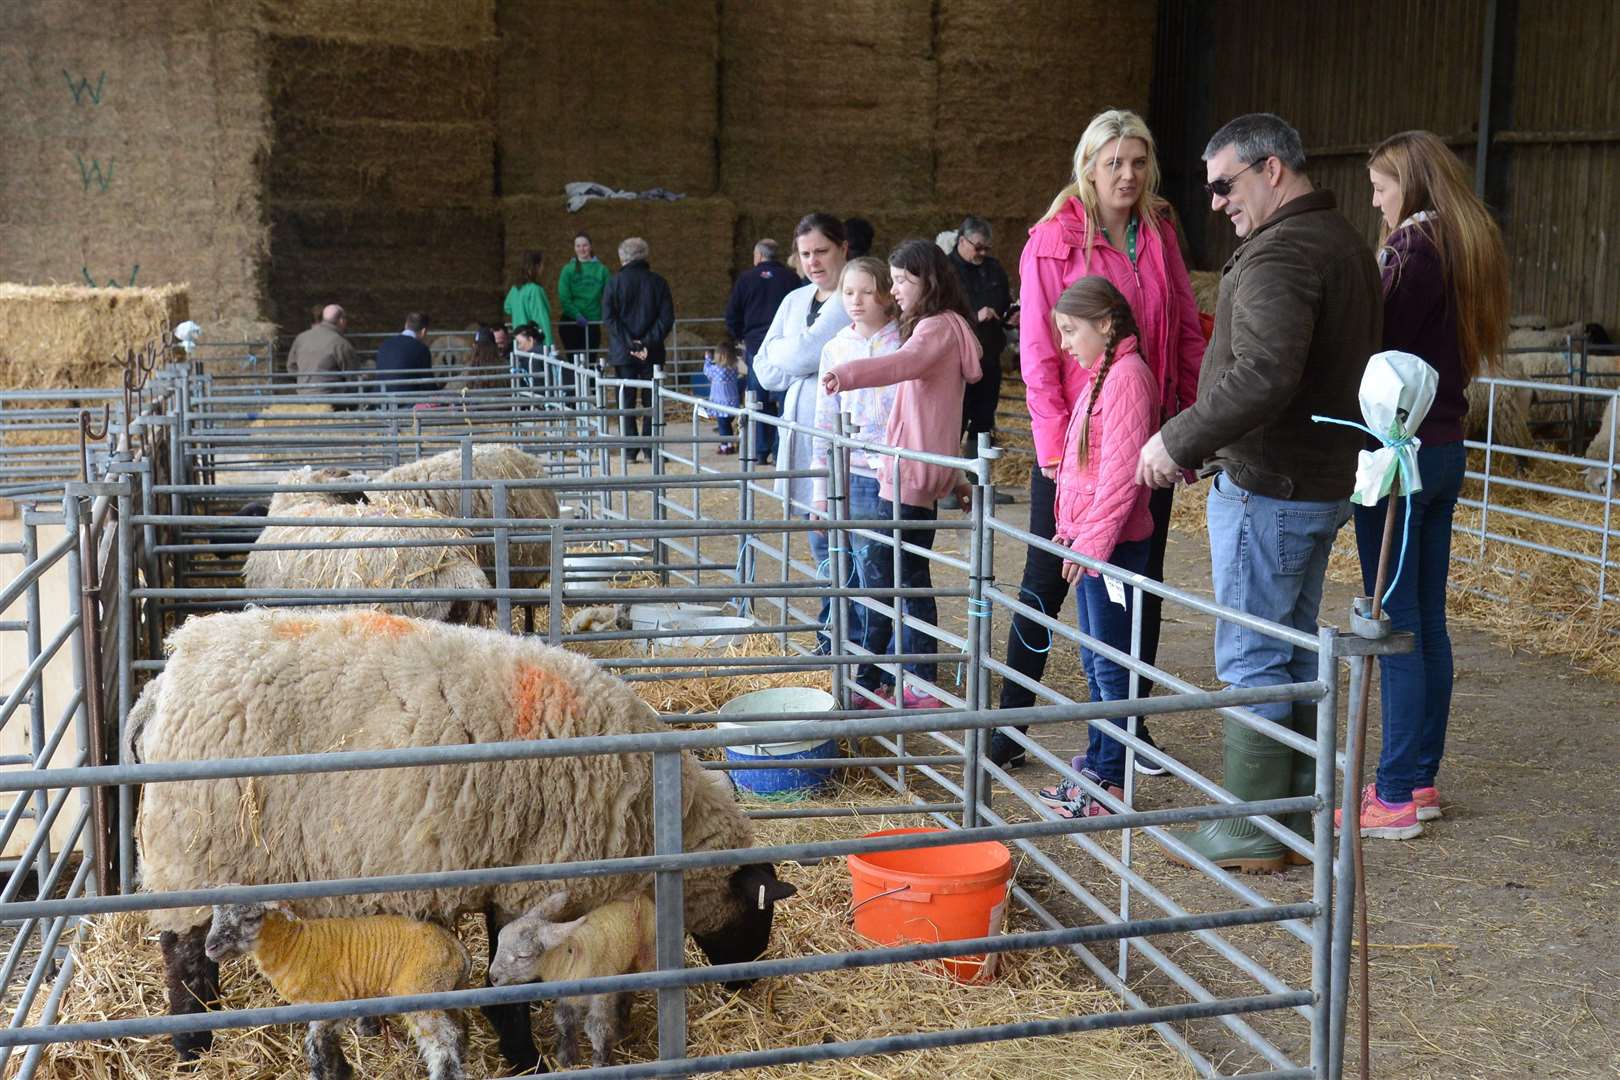 Broadlees Farm in Dover opens its gates every spring to people wanting to see the lambs. Picture: Gary Browne